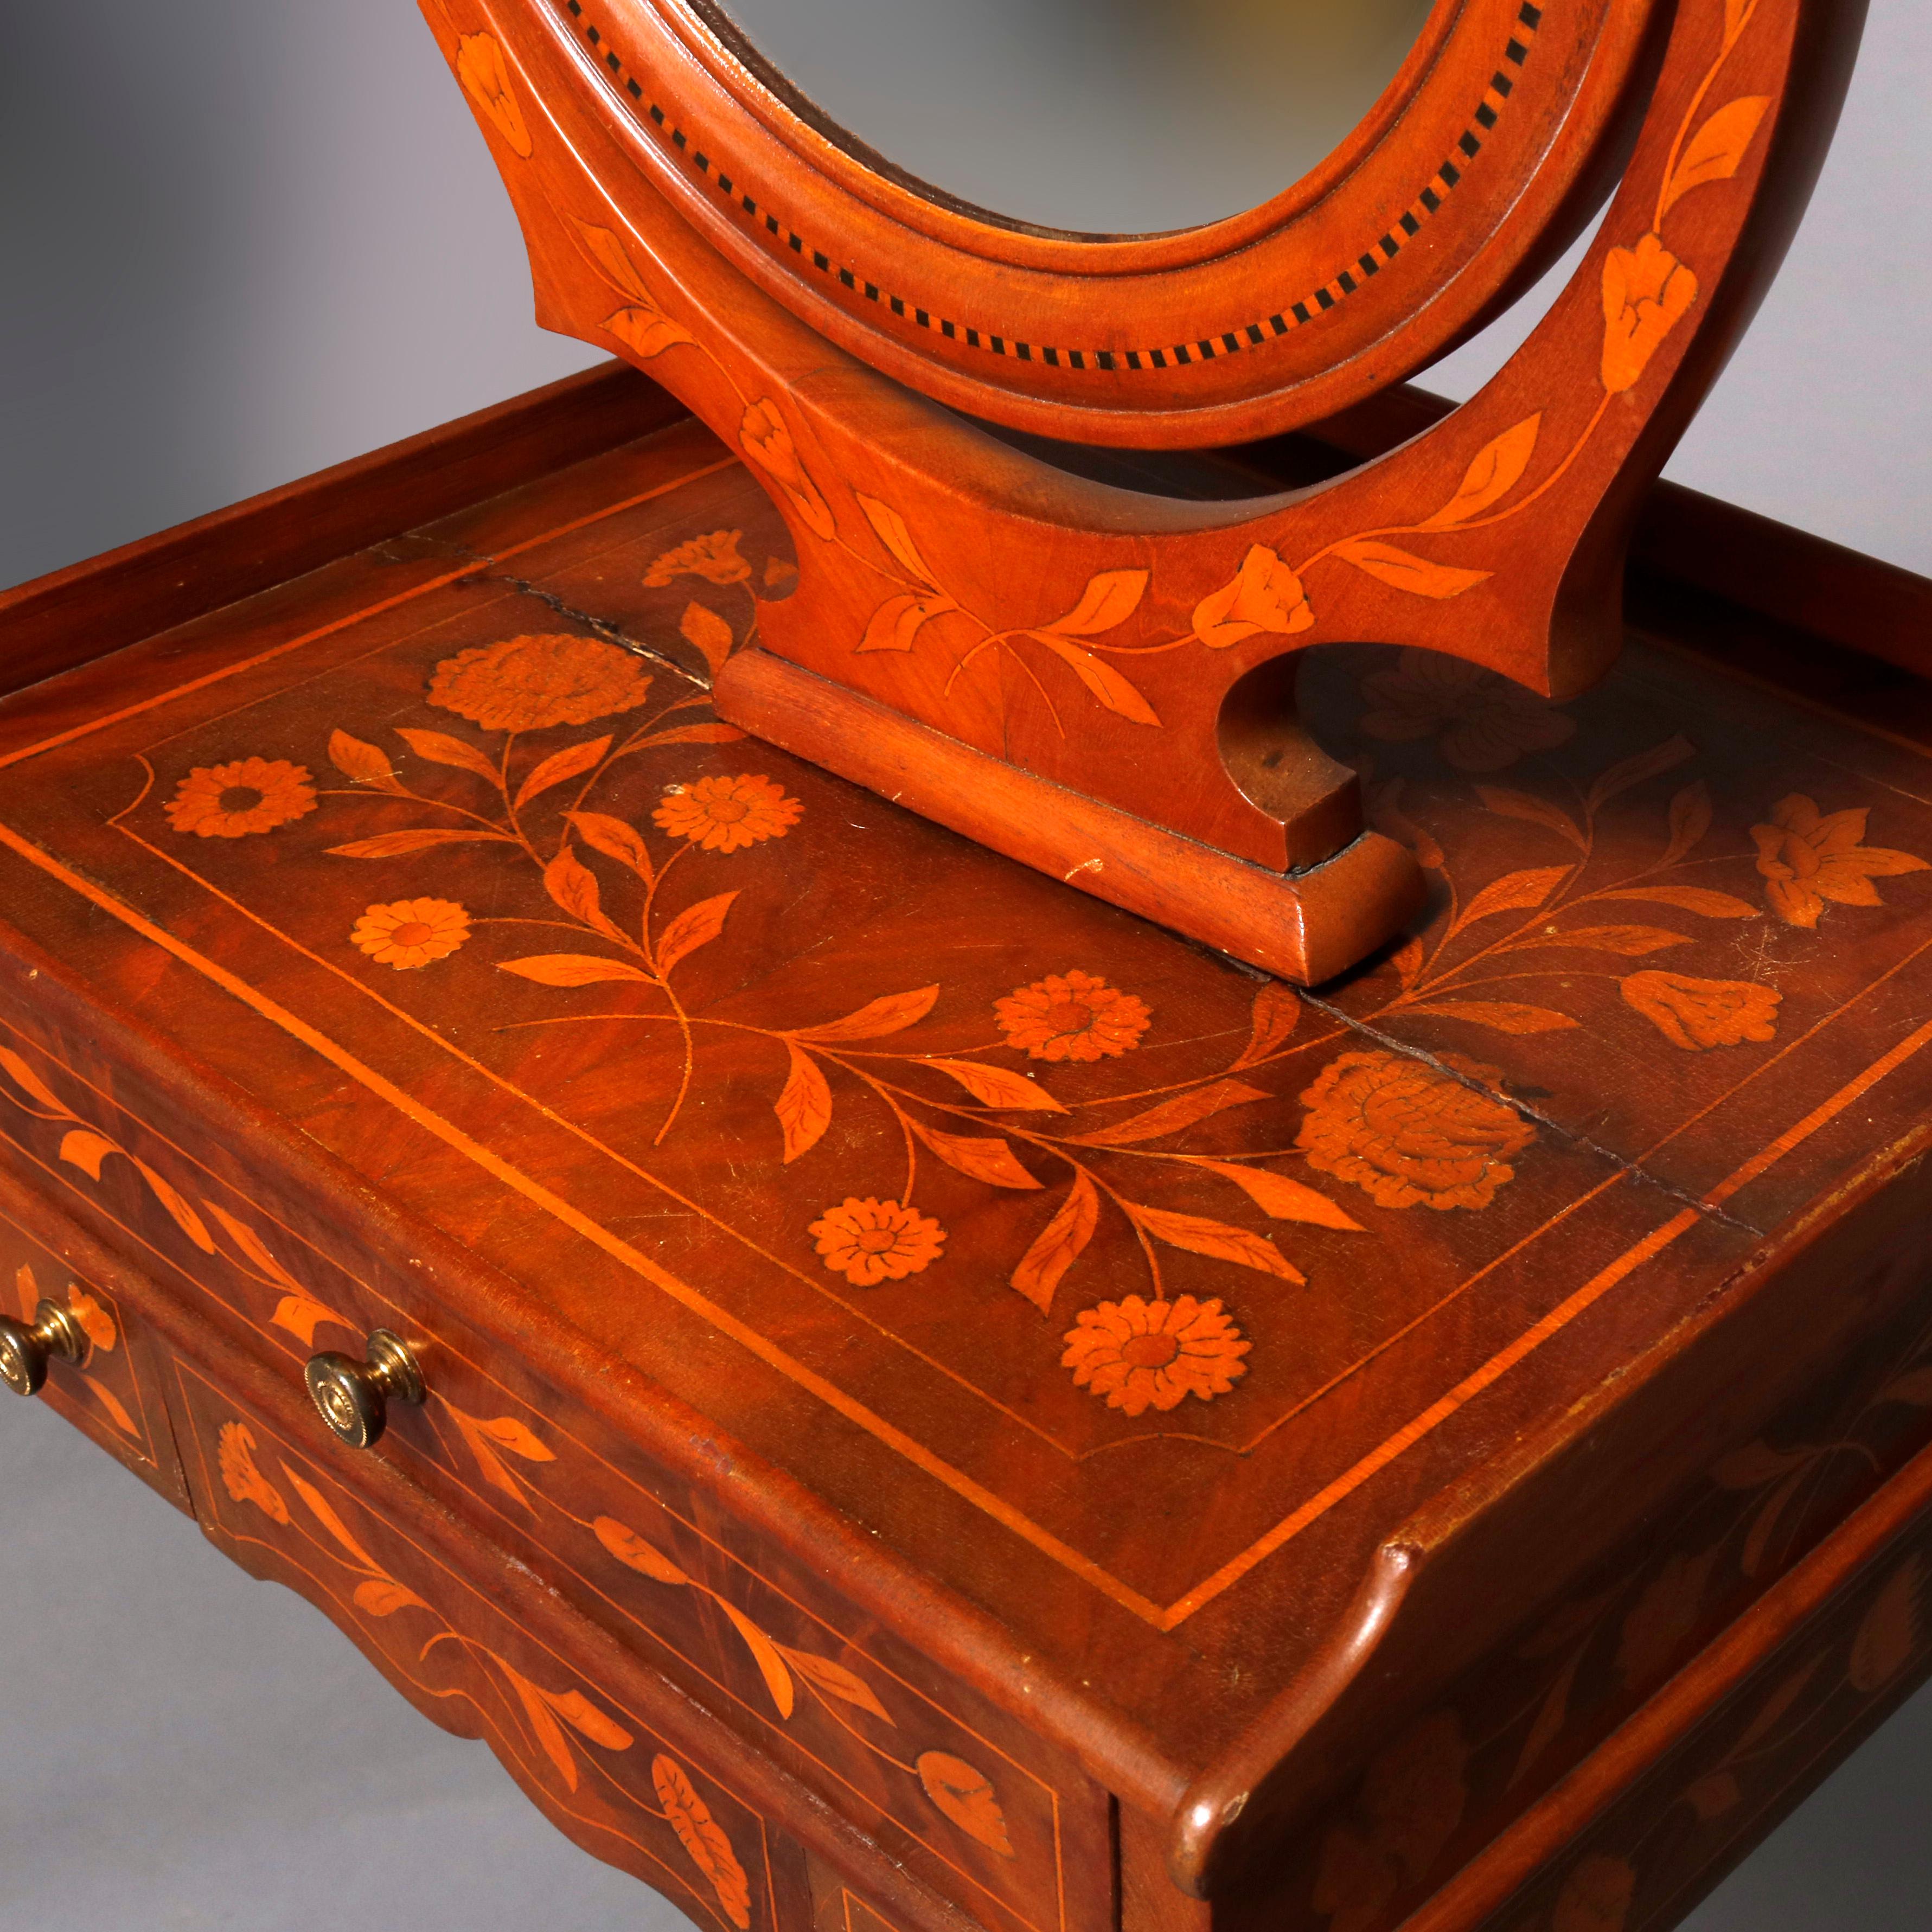 19th Century Antique Flame Mahogany Dutch Marquetry Satinwood Inlaid Shaving Stand